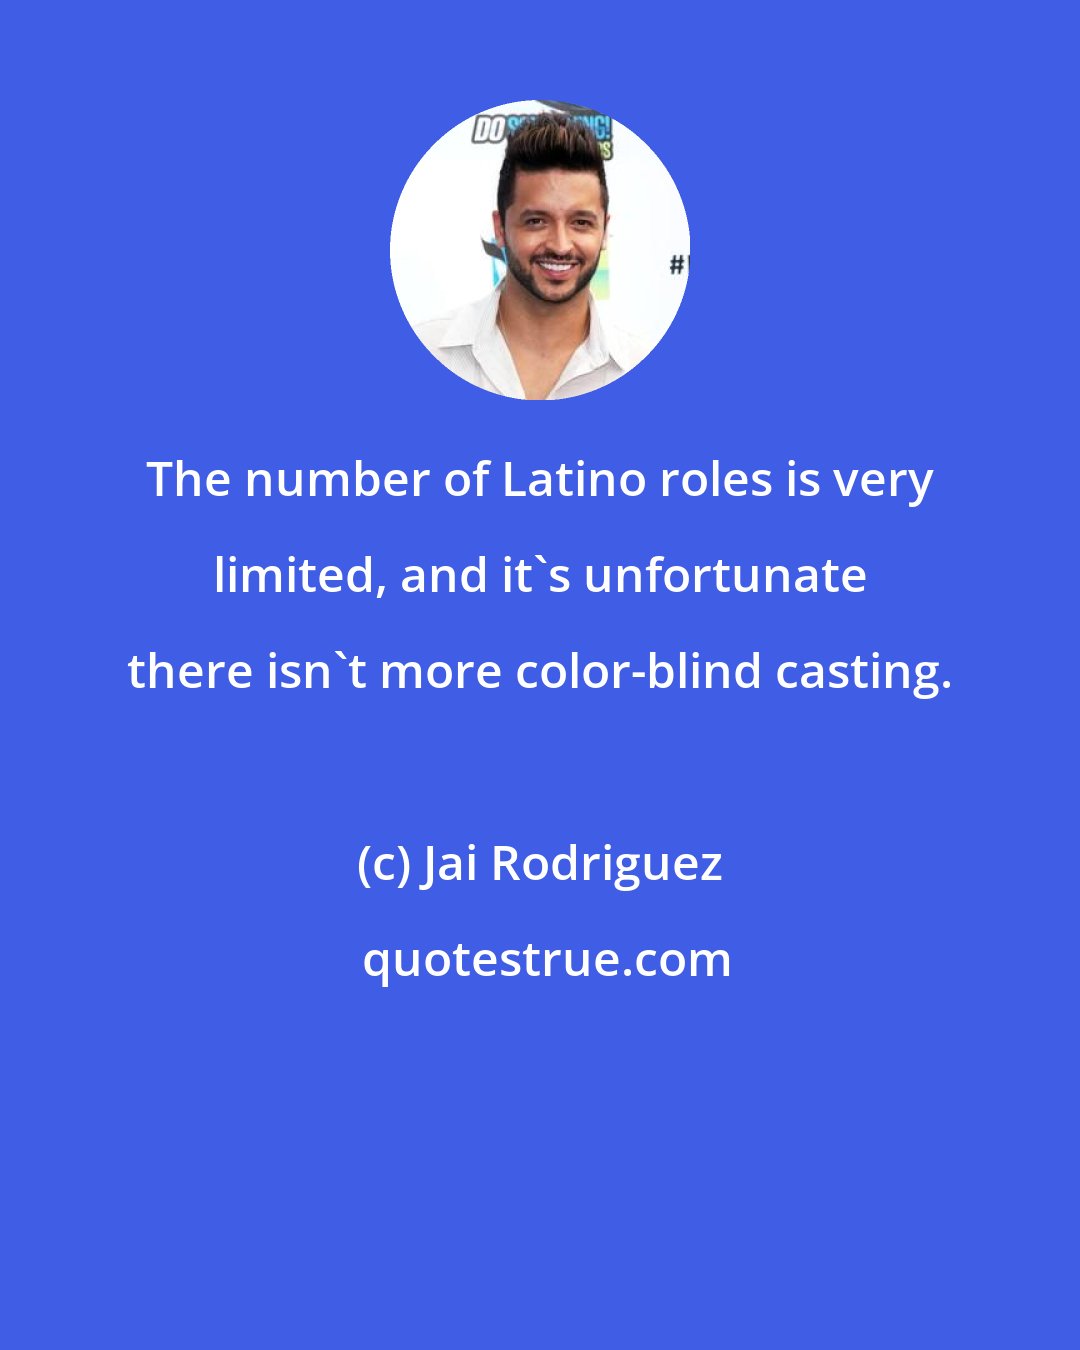 Jai Rodriguez: The number of Latino roles is very limited, and it's unfortunate there isn't more color-blind casting.